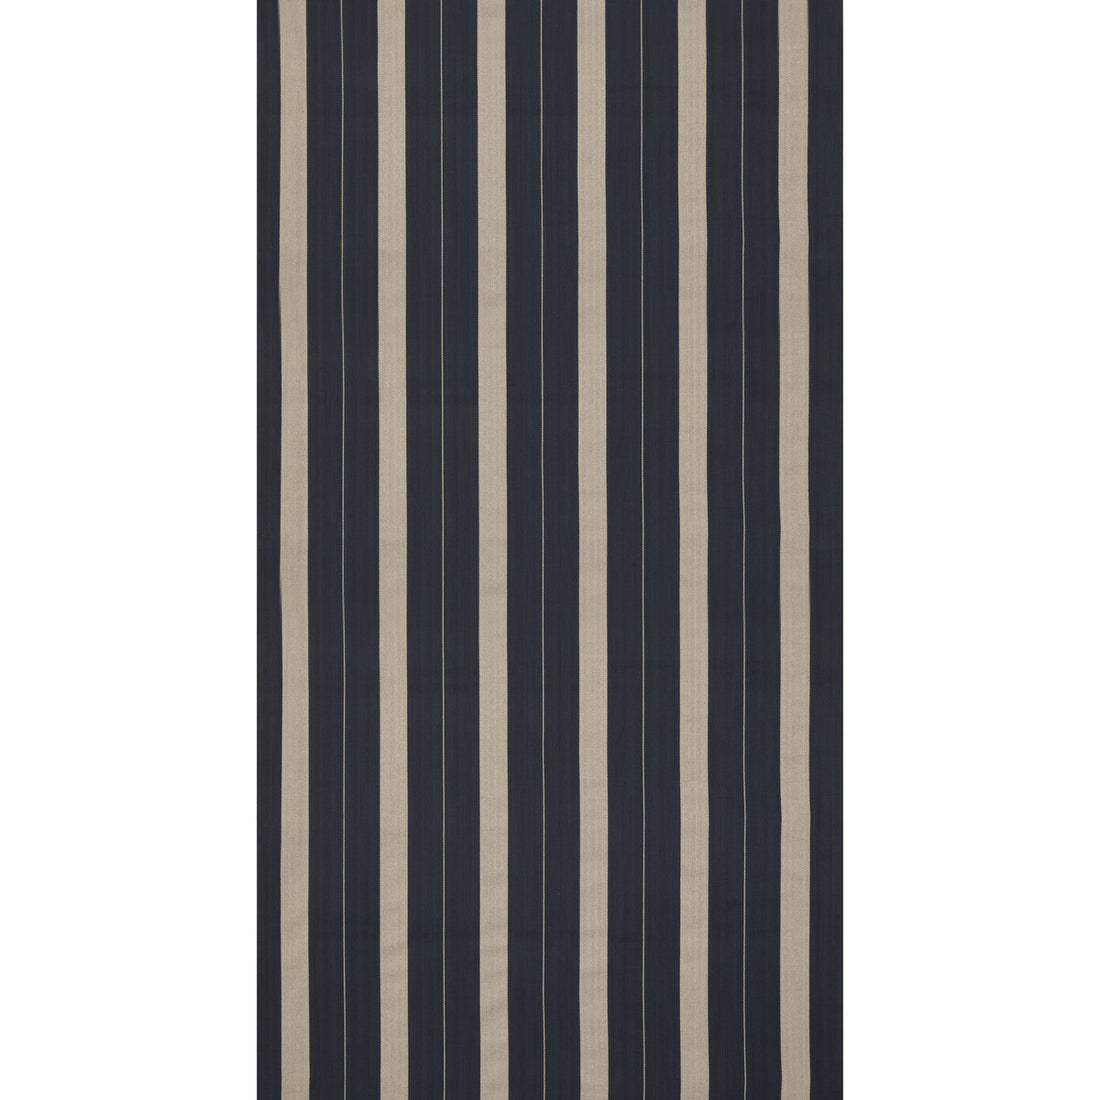 Pamir Stripe fabric in ebony color - pattern ED85341.955.0 - by Threads in the Faraway collection